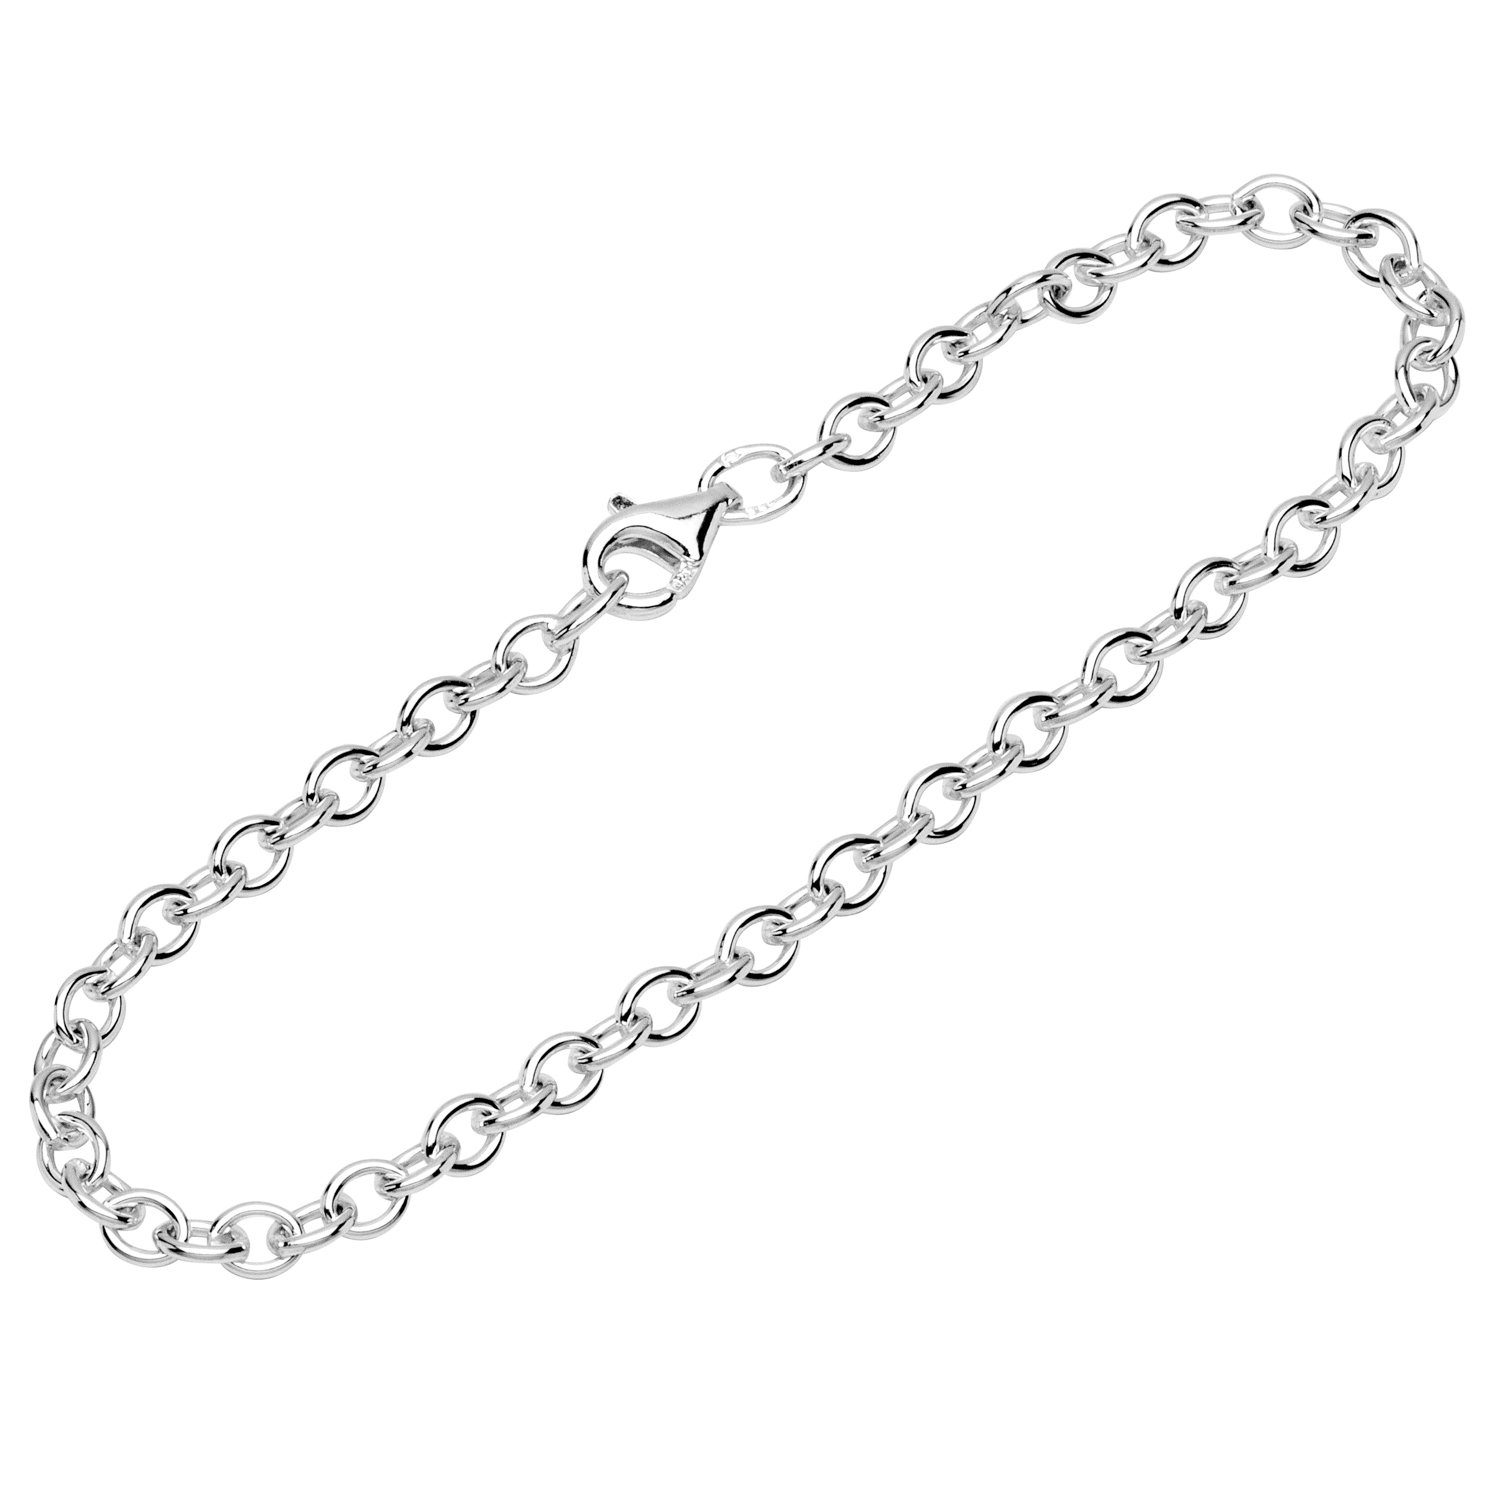 NKlaus Silberarmband Armband 925 Sterling Silber 19cm Weit Ankerkette r (1 Stück), Made in Germany